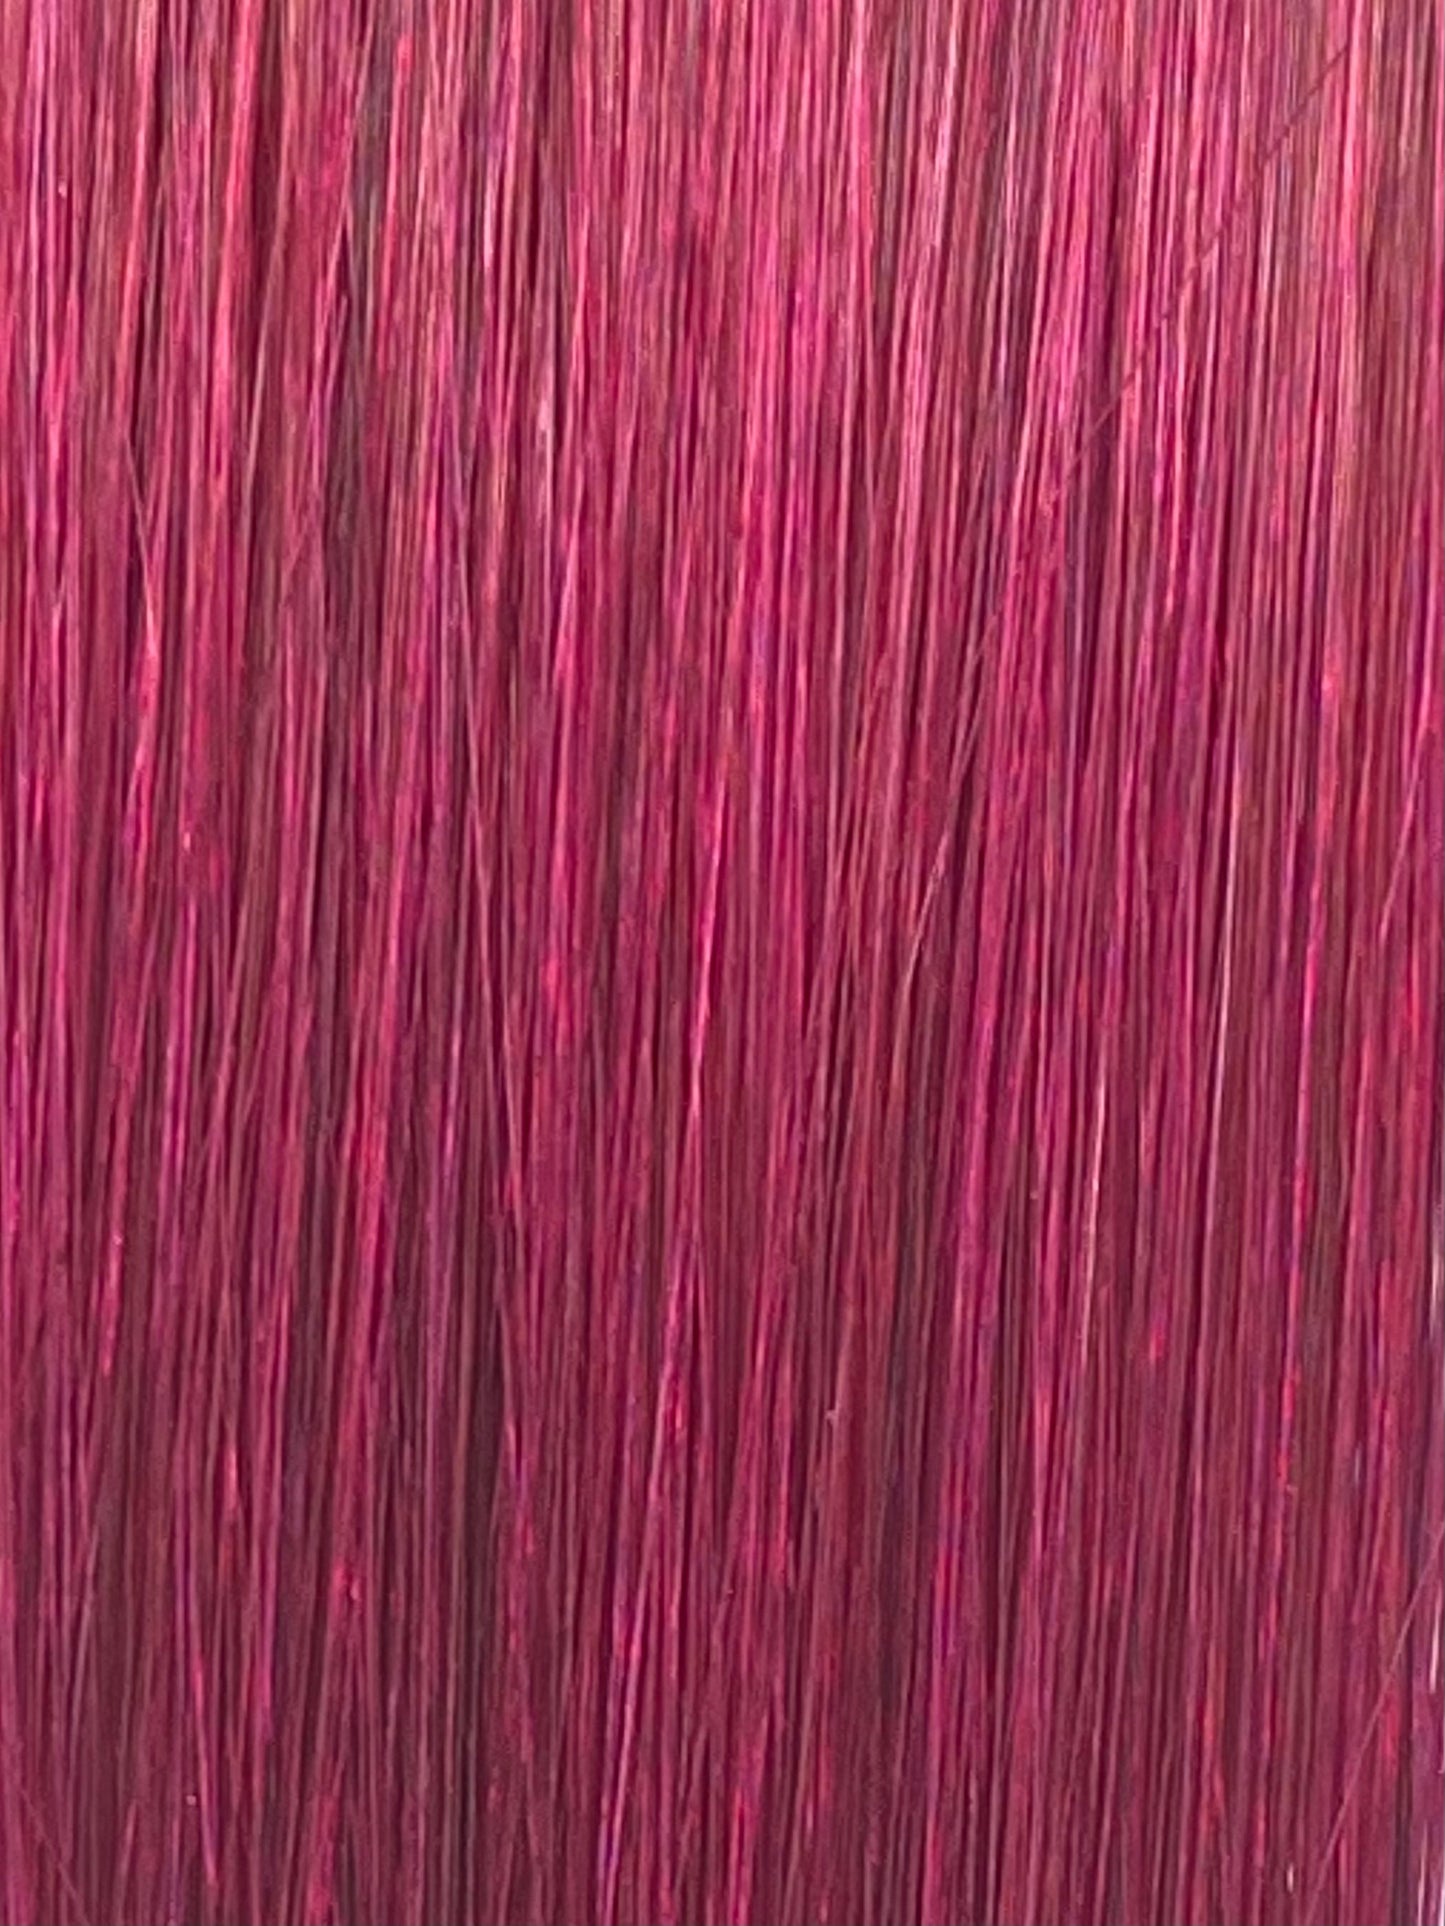 Fusion hair extensions #RedViolet - Fantasy - 50cm/20 inches - Red Violet Fusion Euro So Cap 